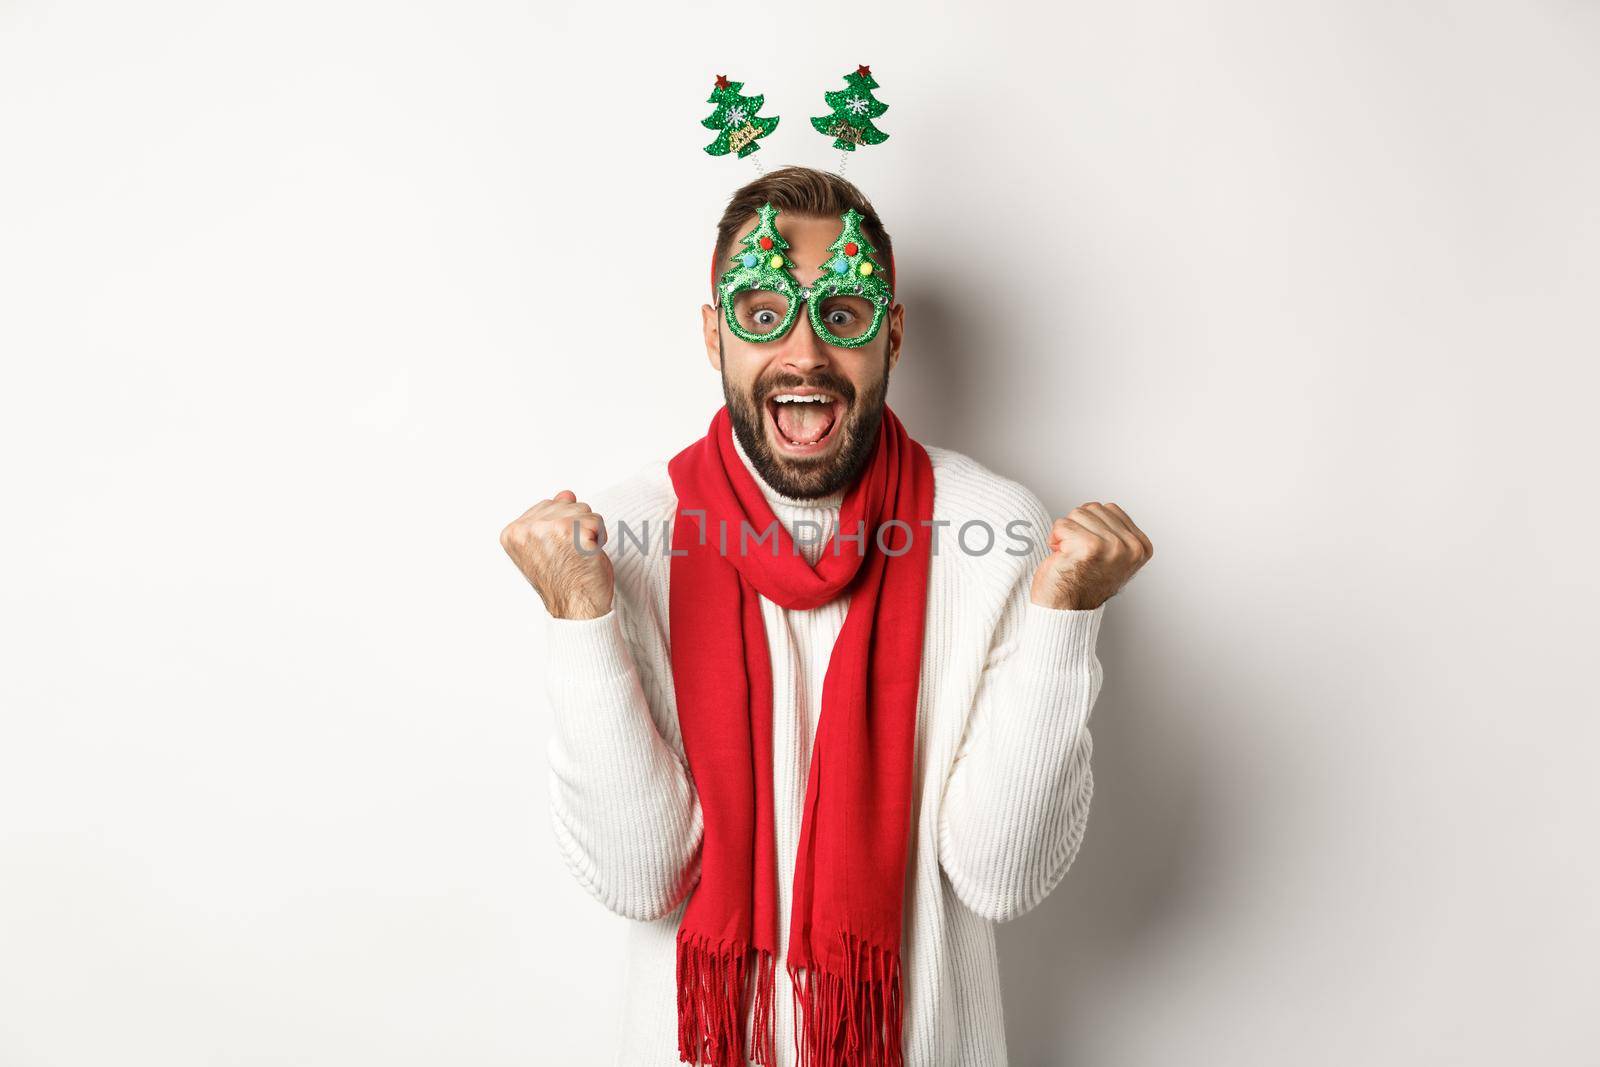 Christmas, New Year and celebration concept. Excited man winning prize, winter promotion, making fist pump and celebrating, wearing party glasses, white background.